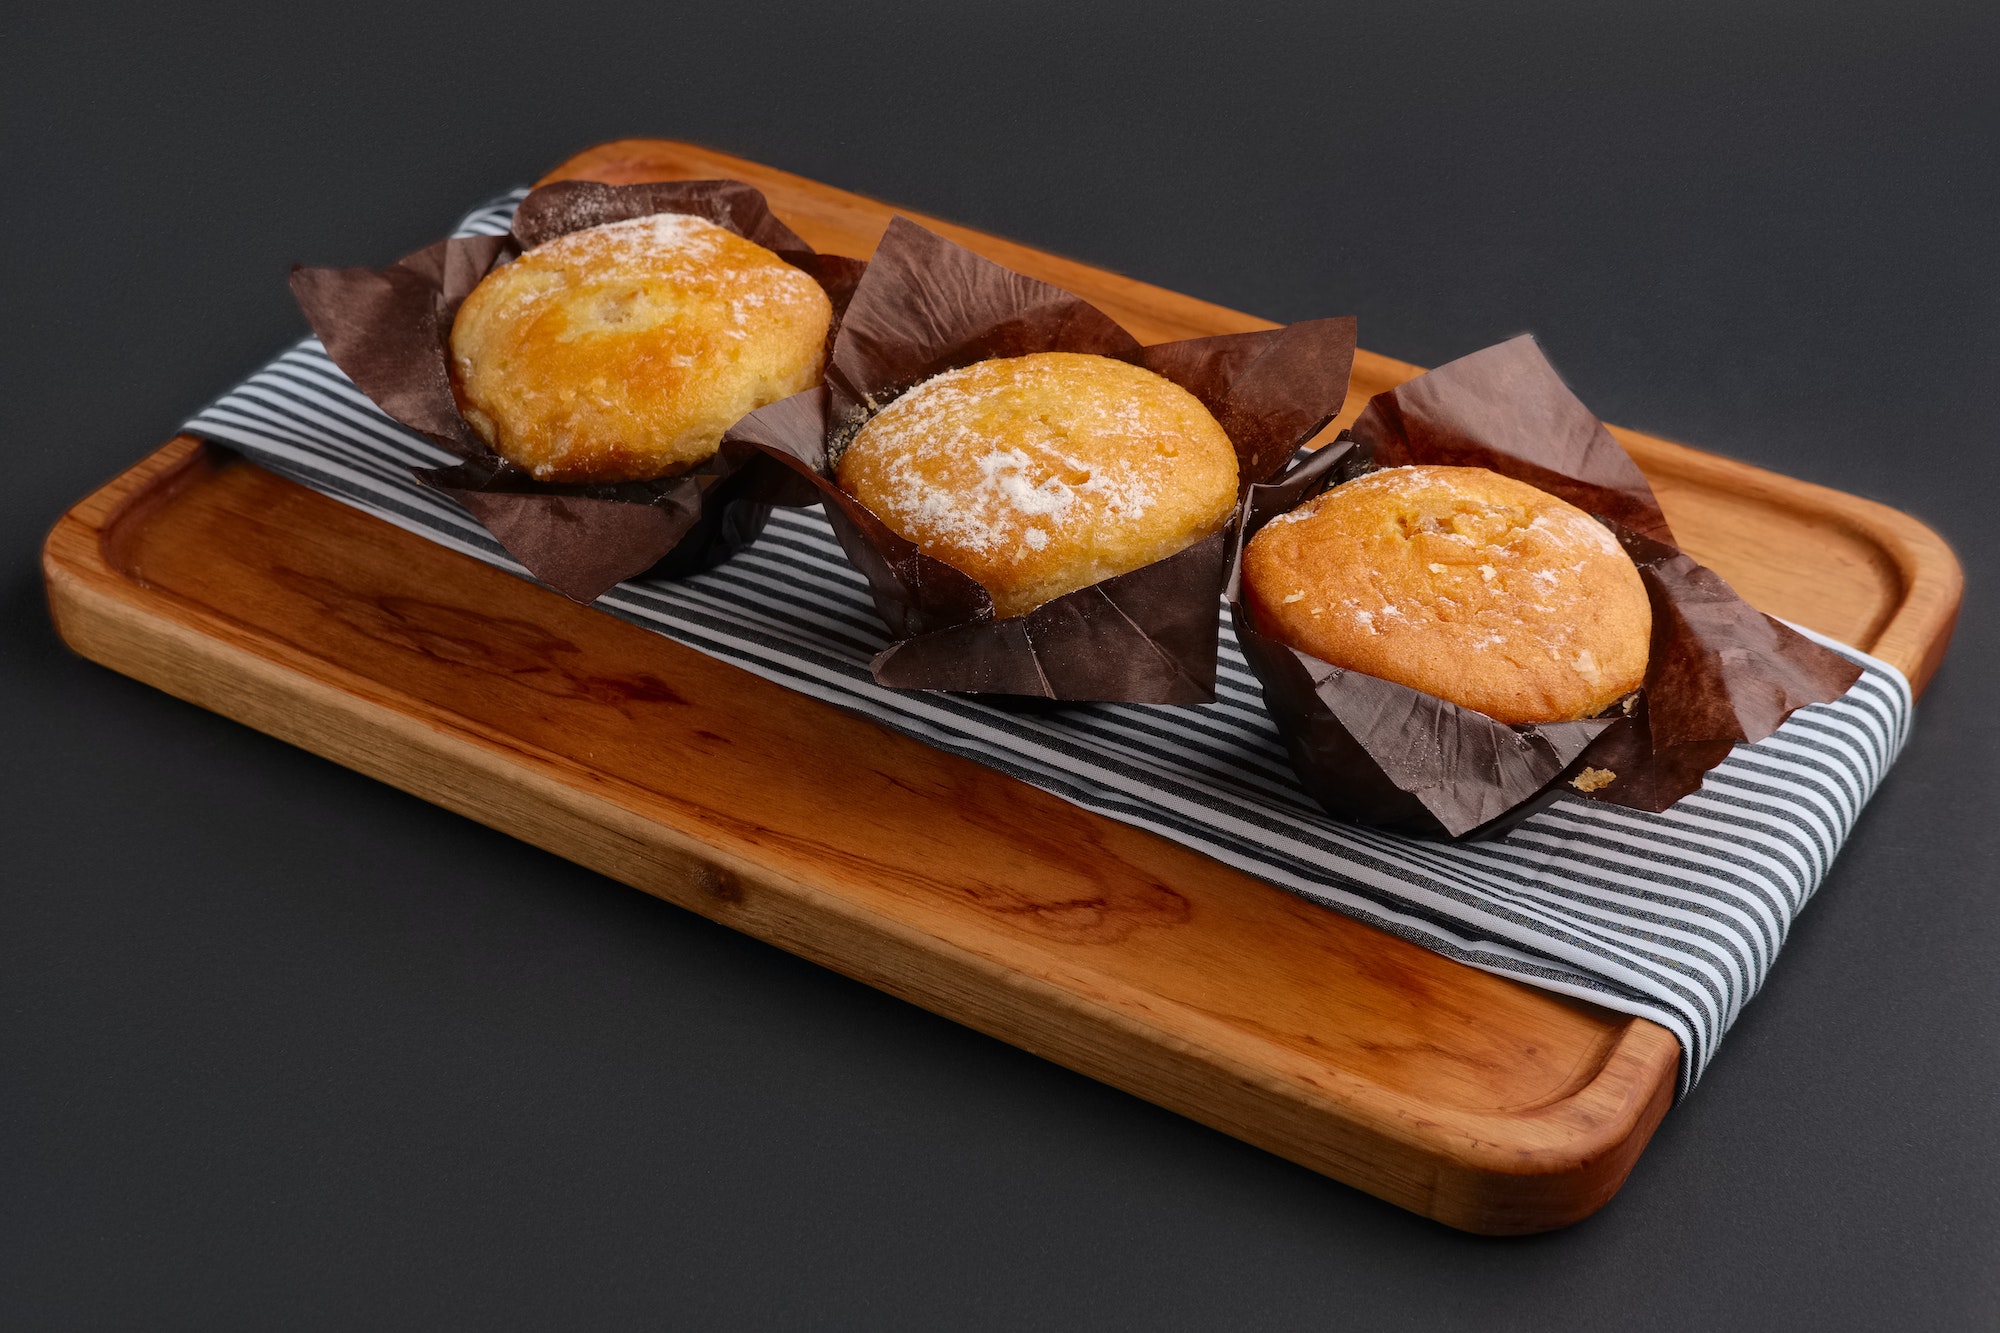 Three muffins wrapped in paper on wooden plate